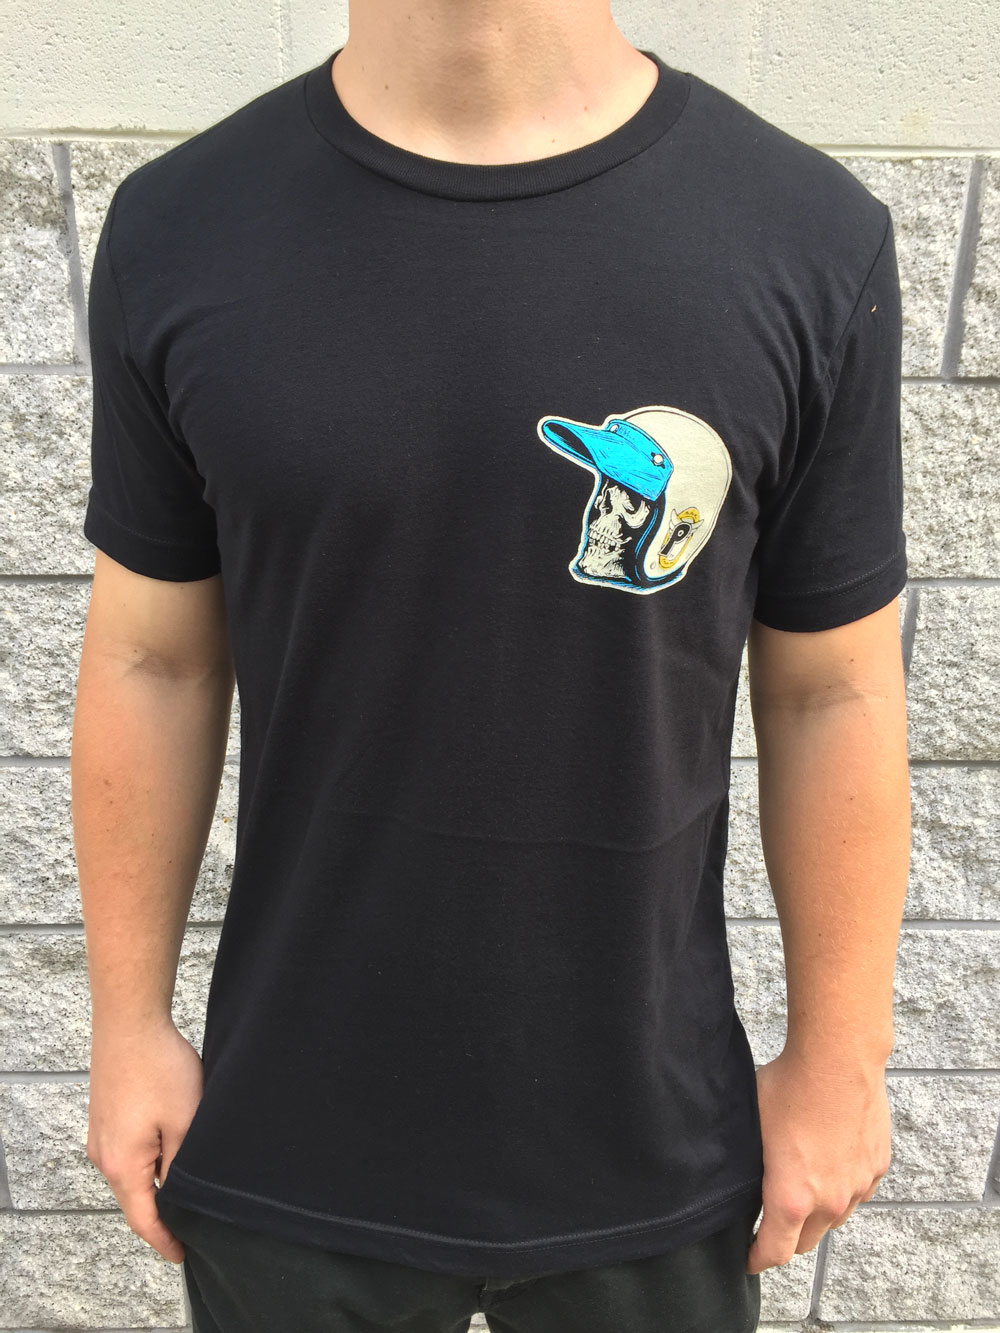 Profile "From the Dungeon" t-shirt